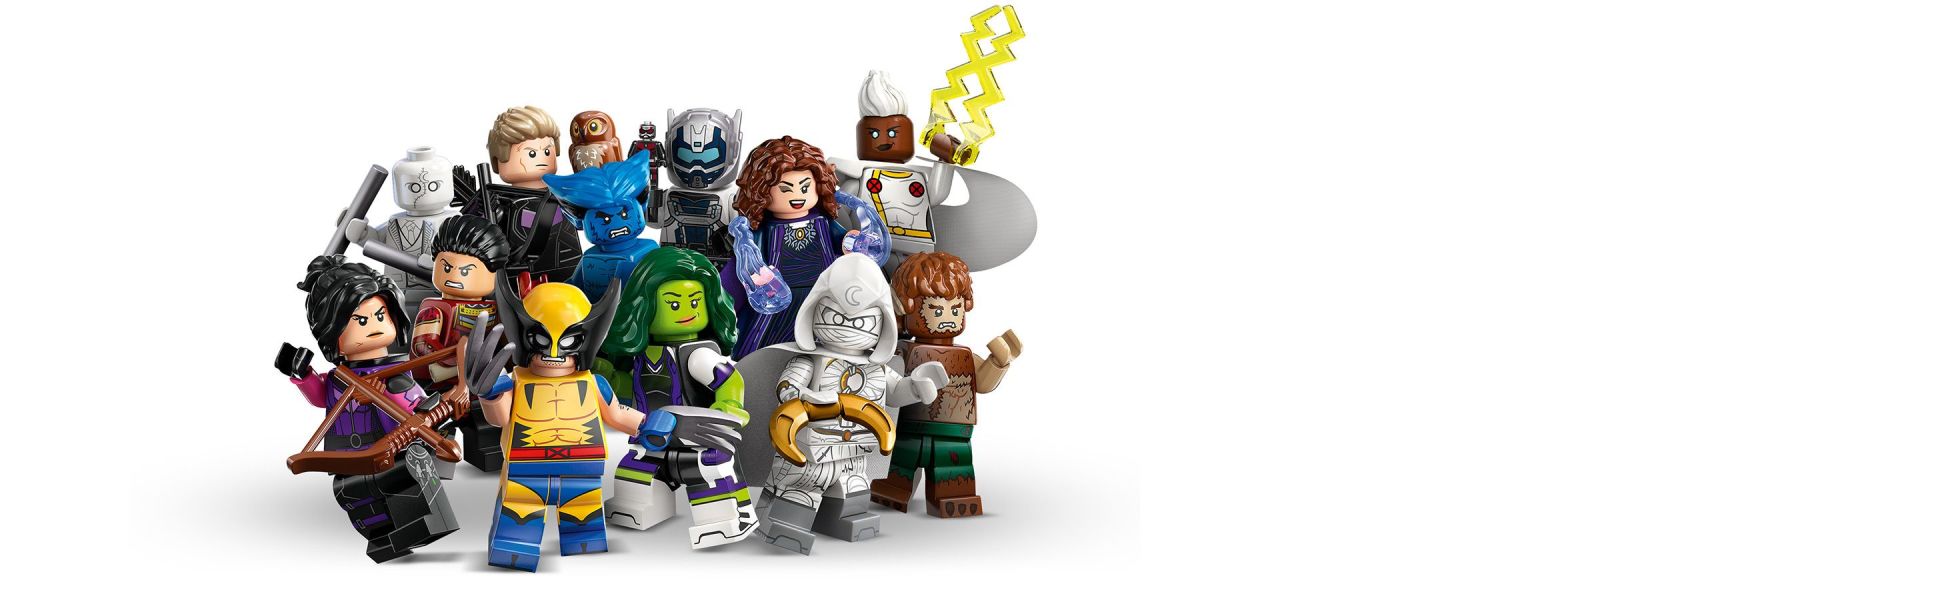 LEGO 71039 Marvel Series 2 Mini Figures, 1 of 12 Iconic Disney+ Characters  to Collect in Each Bag, Includes Wolverine, Hawkeye, She-Hulk, Echo and